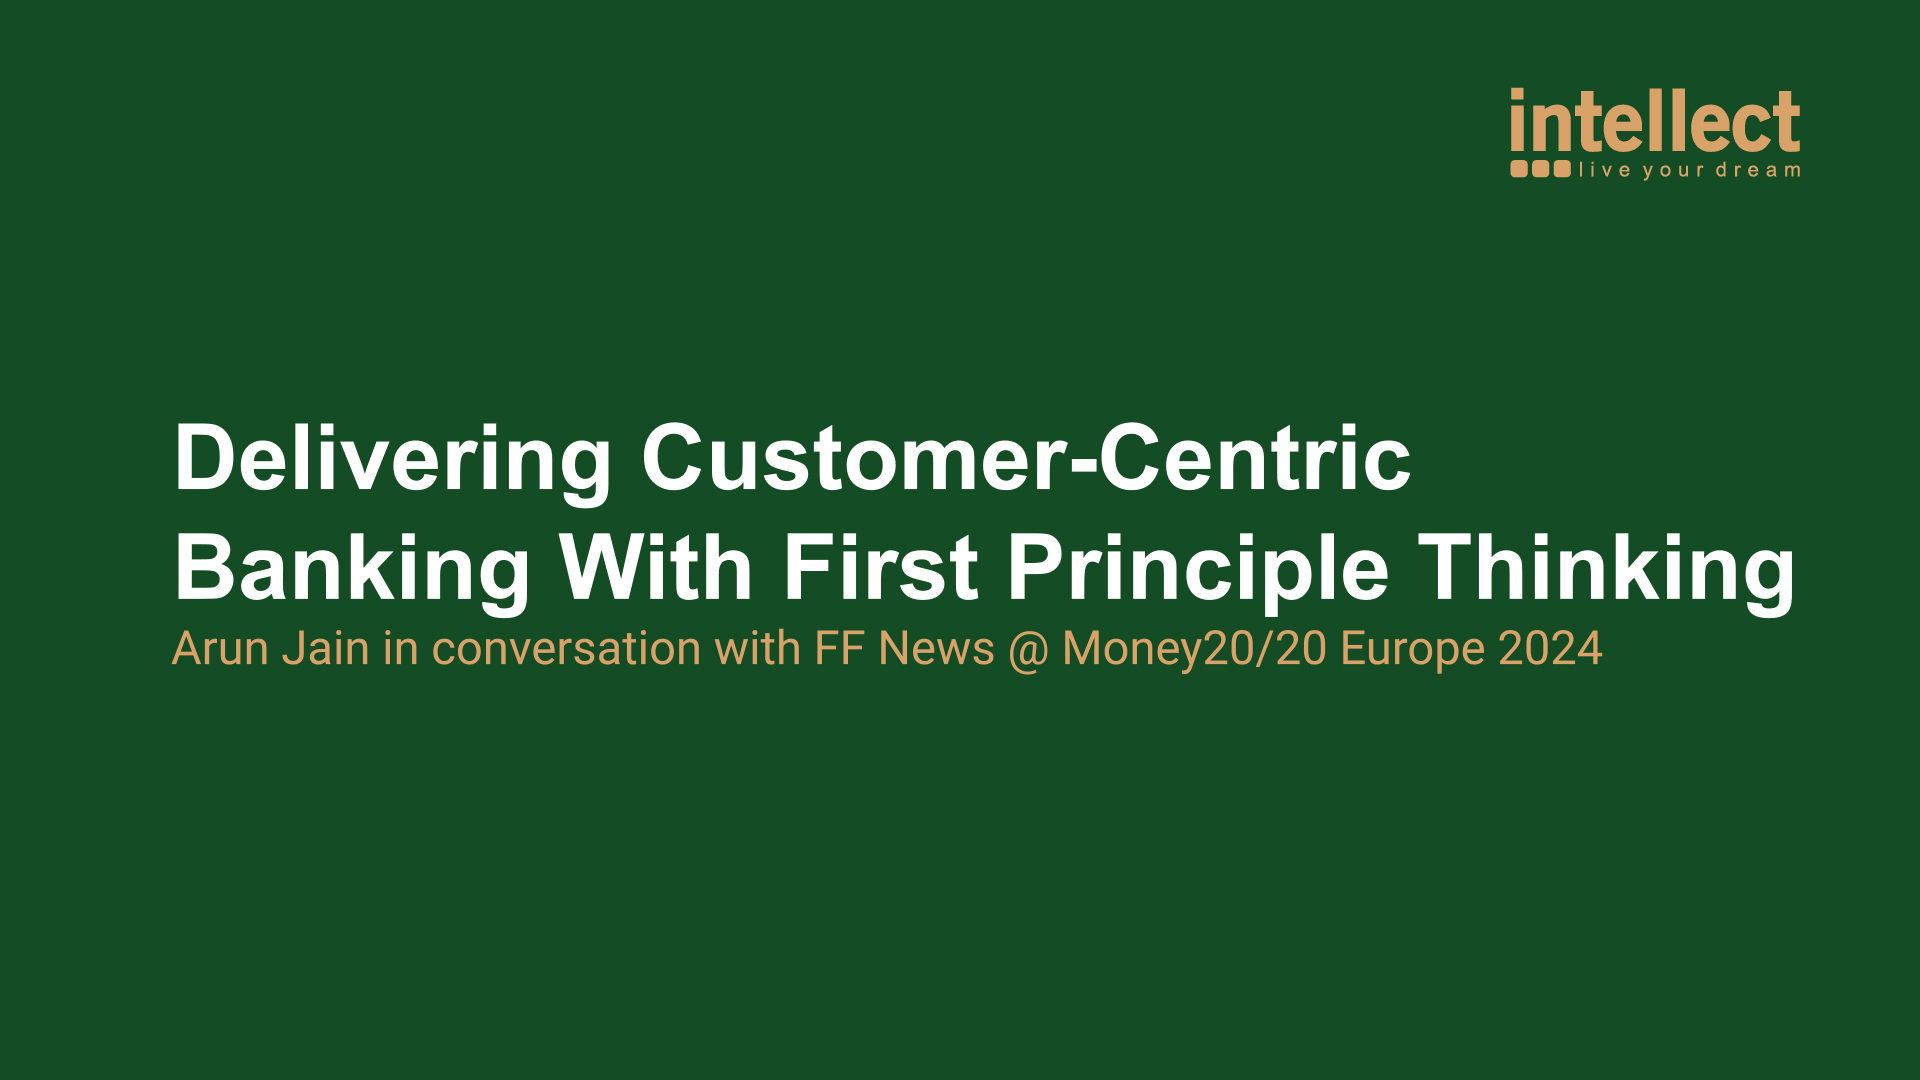 Delivering Customer-Centric Banking With First Principle Thinking